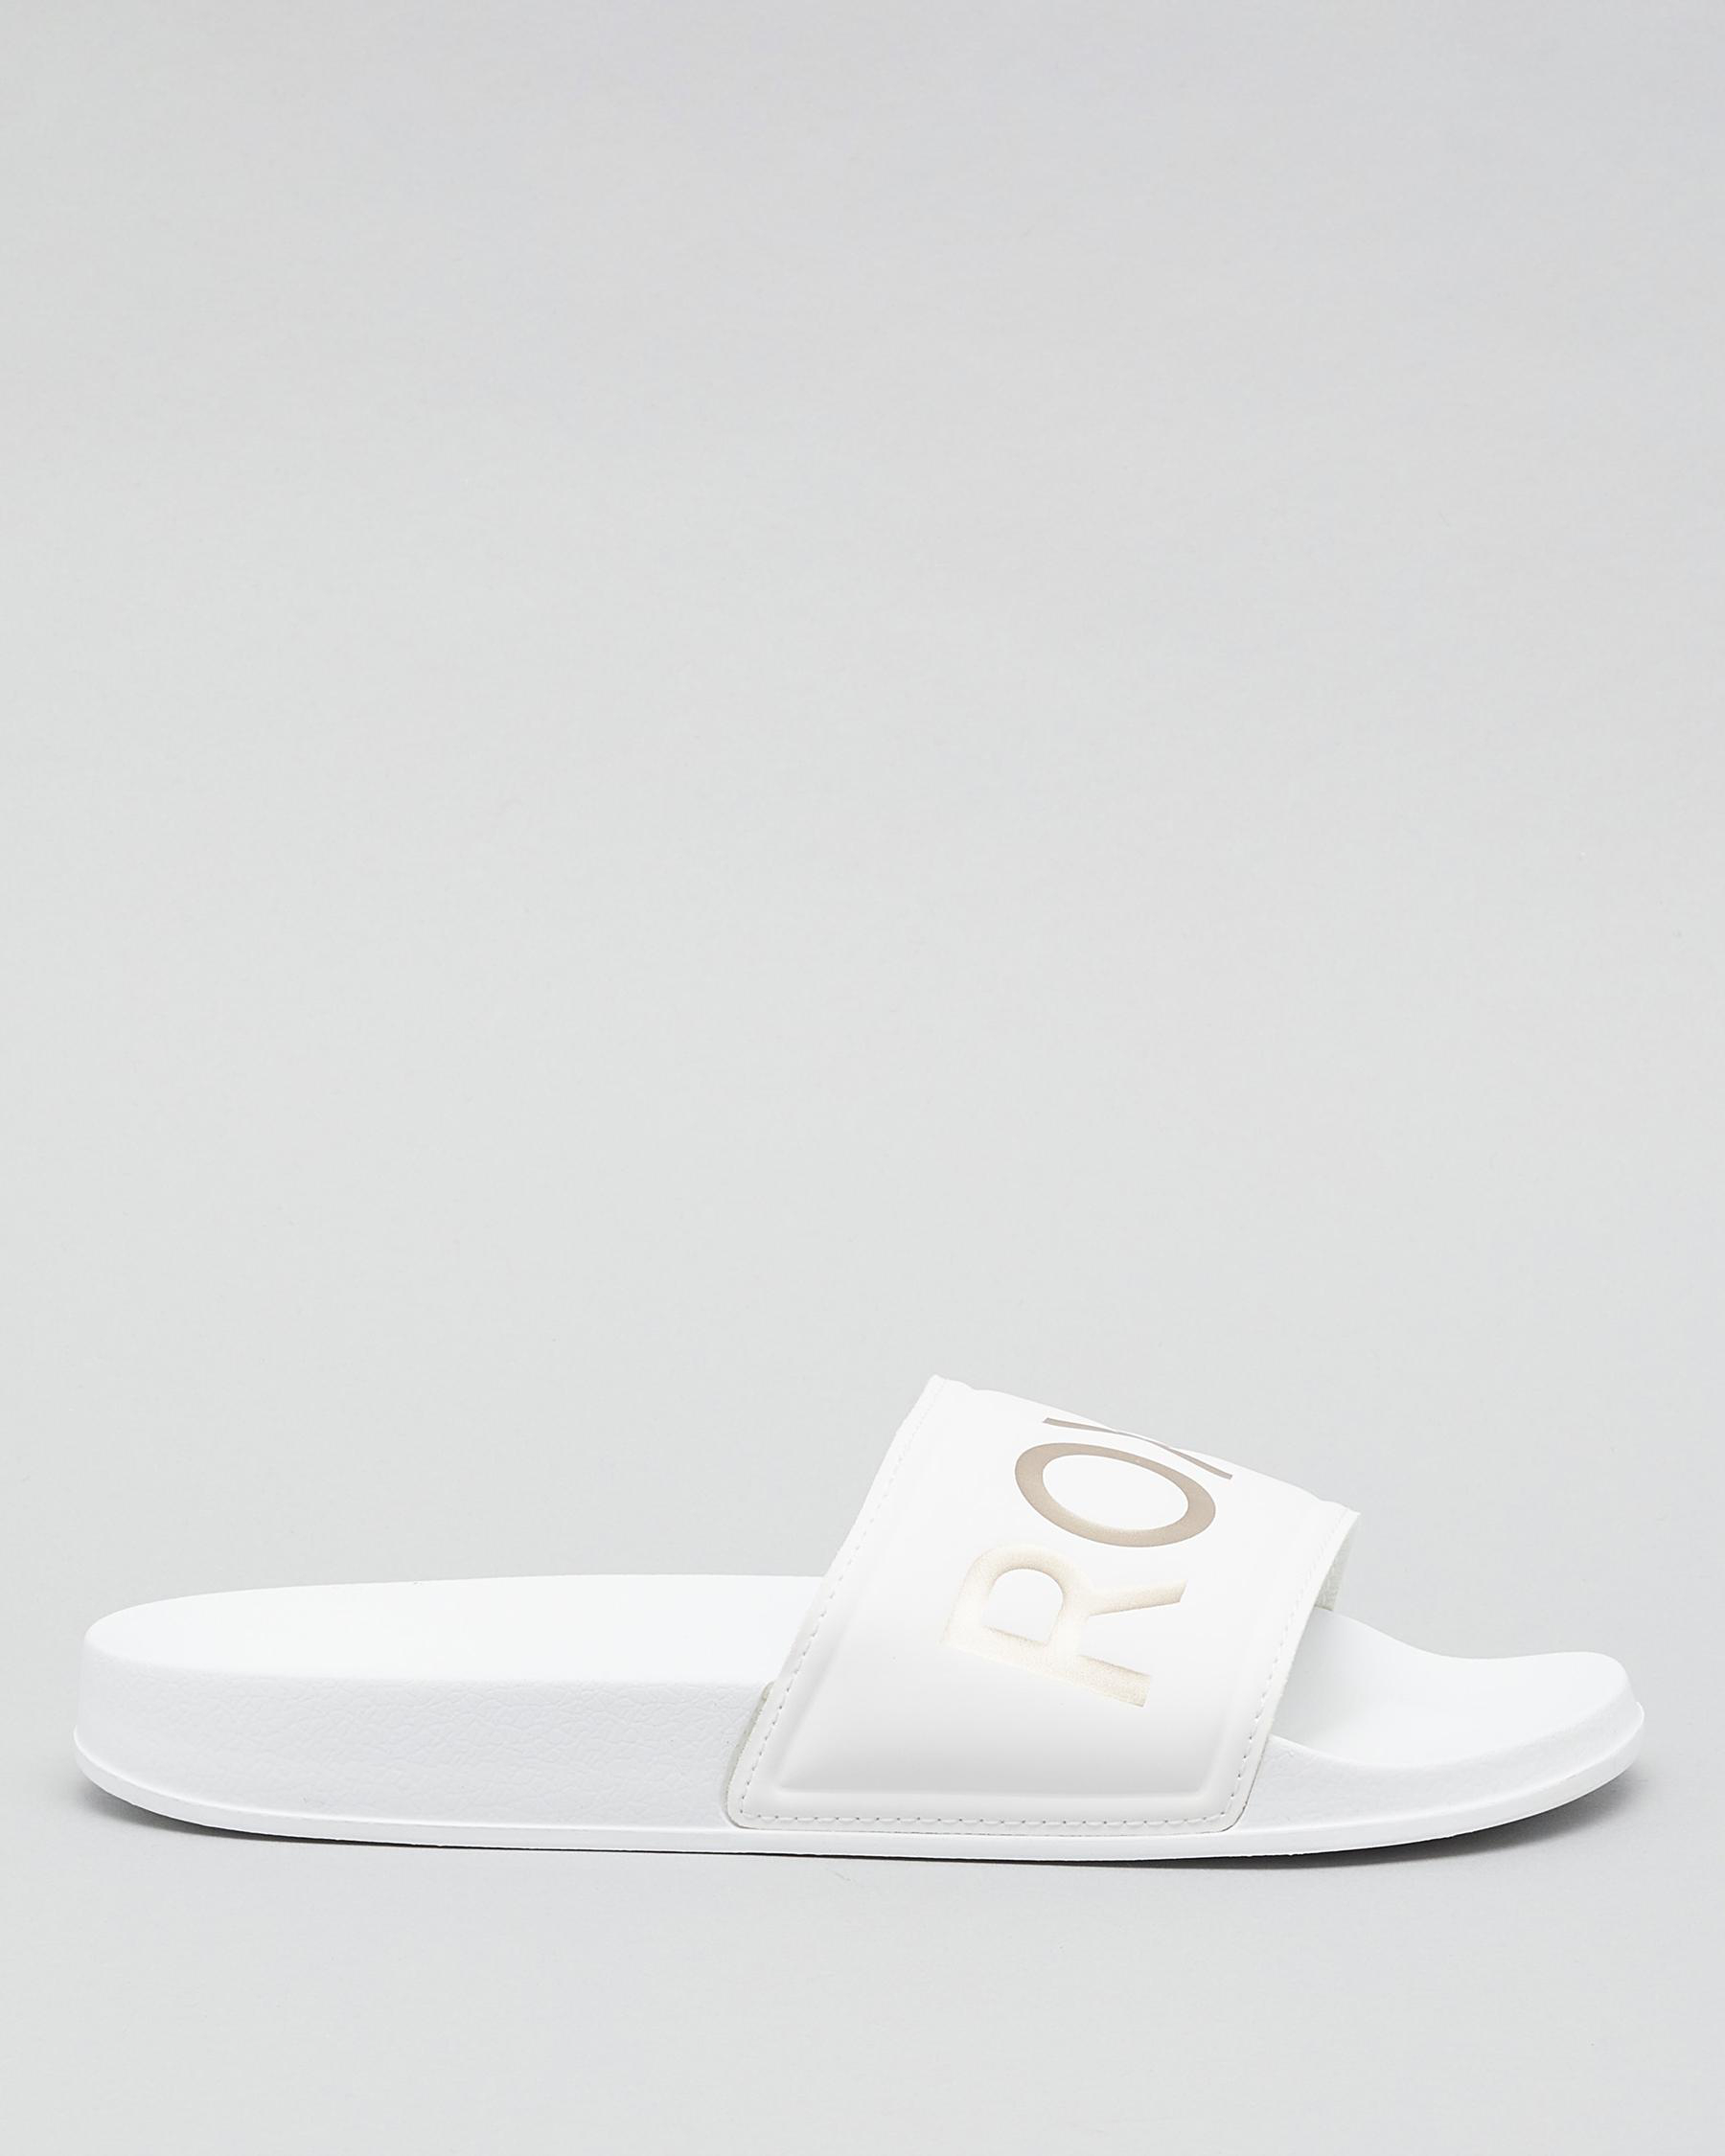 Shop Roxy Slippy Slide Sandals In White Smooth - Fast Shipping & Easy ...